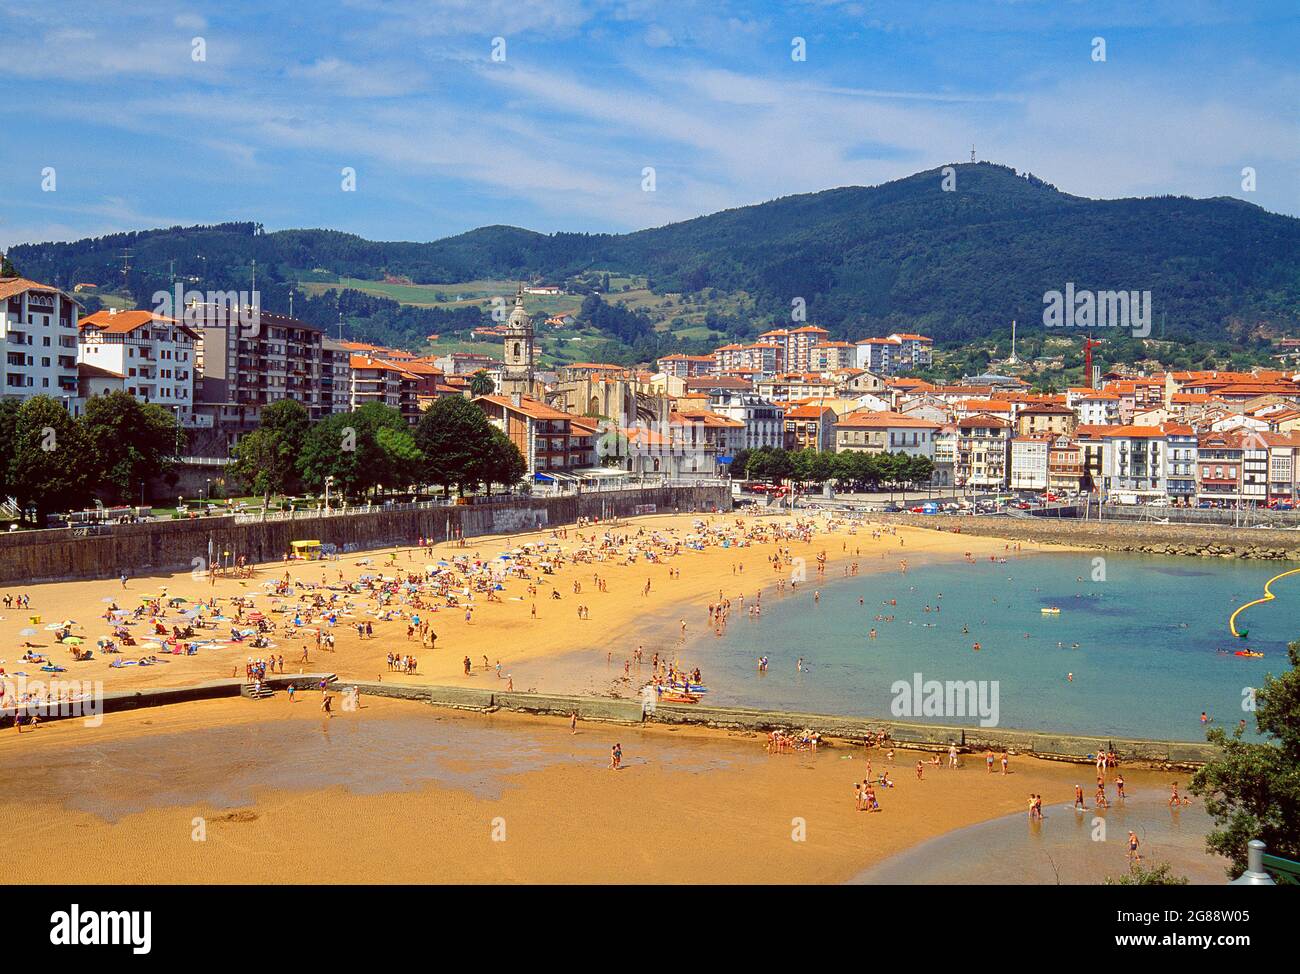 Overview and beach. Lequeitio, Vizcaya province, Basque Country, Spain. Stock Photo